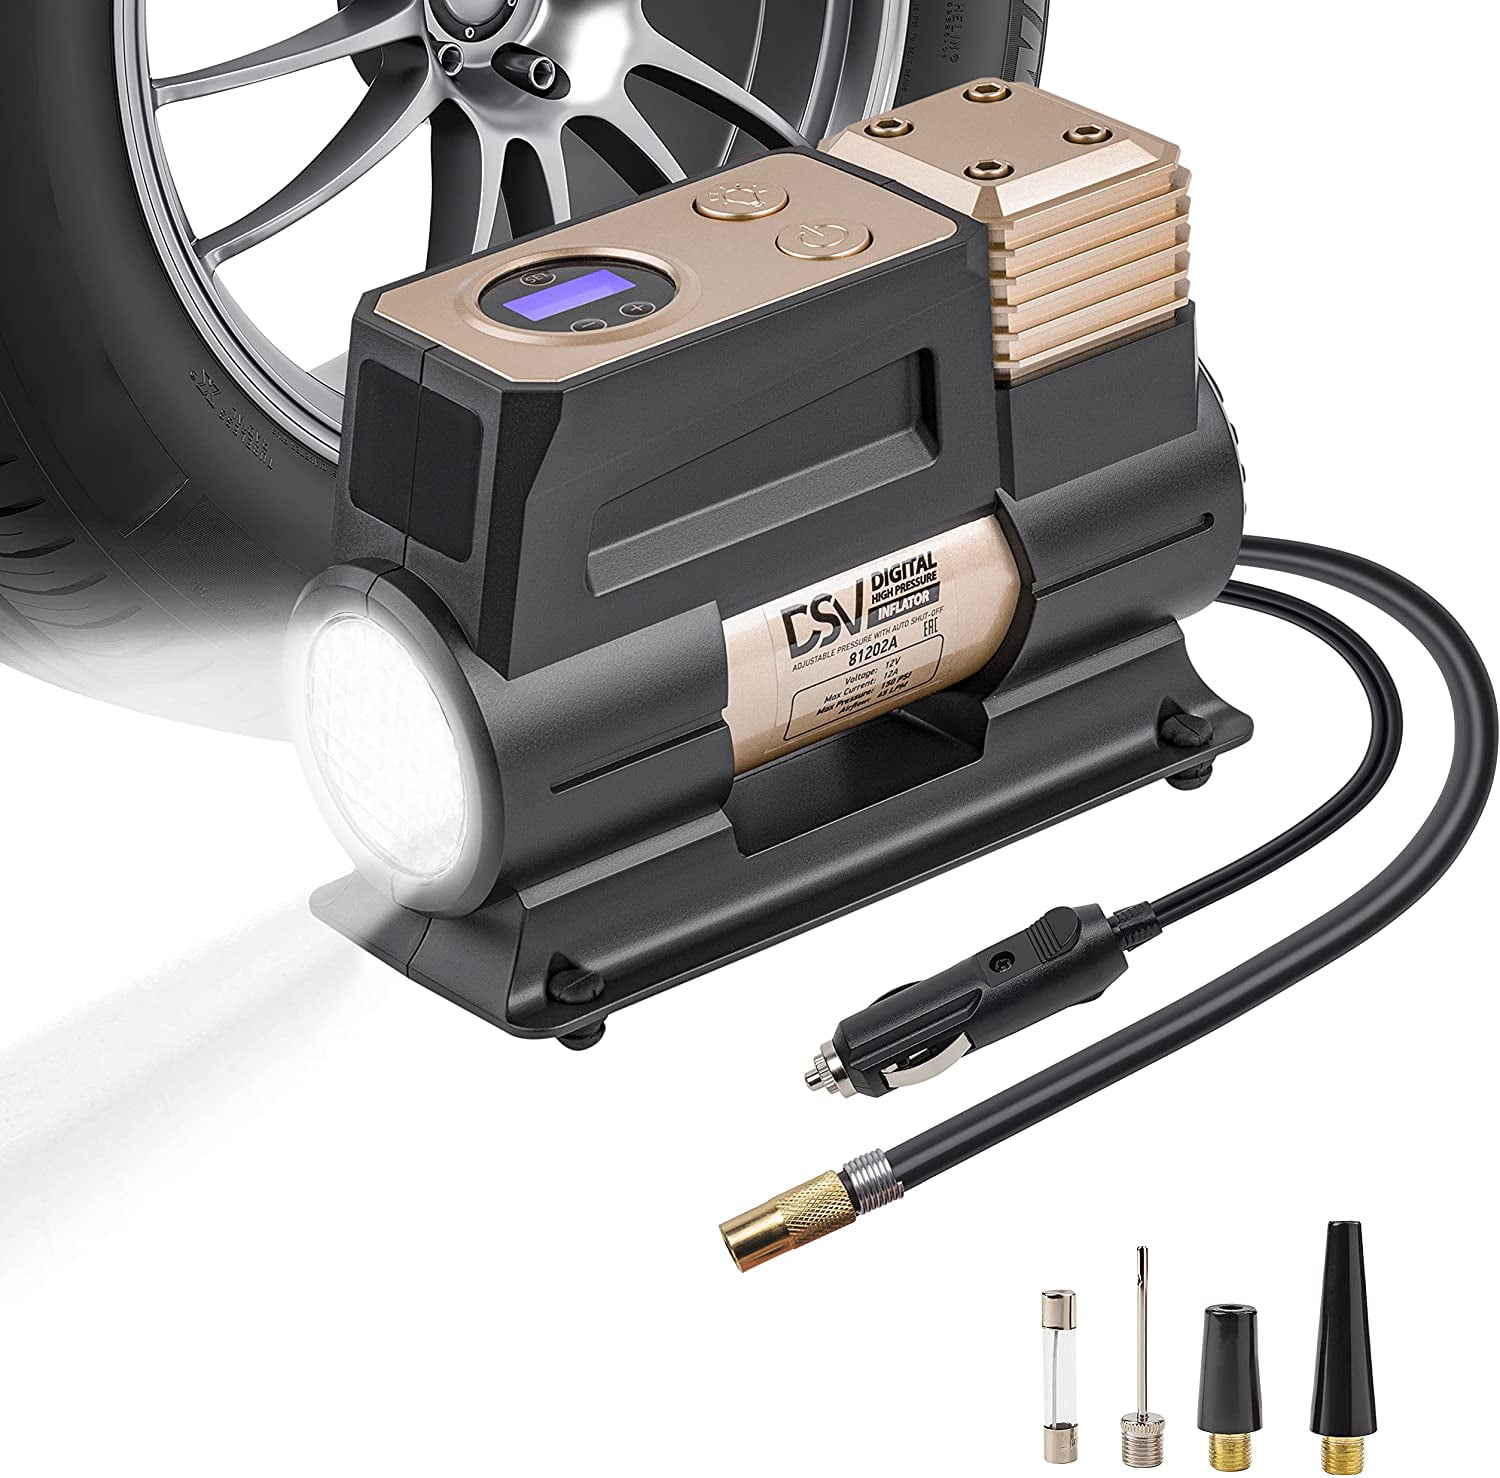 DSV Standard Digital Portable Heavy Duty Double Cylinders Air Compressor  Tire Inflator,12V DC 150PSI Air Pump with Auto Shut Off,Led Light .Car